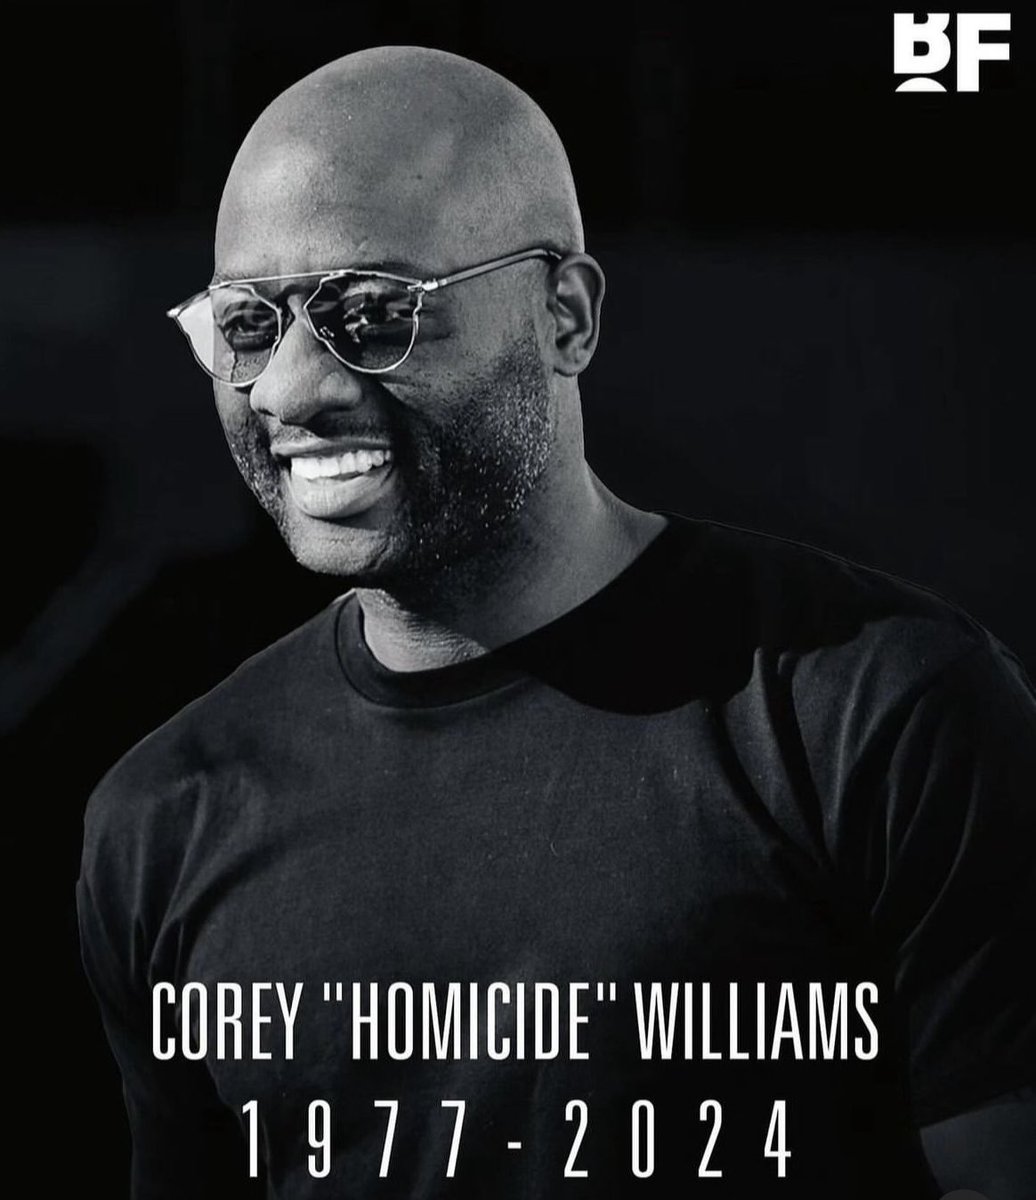 Today we mourn the loss of a #NYC legend, a man whose intense competitive spirit on the court was equally matched by his larger-than-life personality off it. Rest In Peace to Corey “Homicide” Williams. You never cheated the game. SALUTE!!! 🫡🫡🫡 🙏 #BiggerThanBasketball